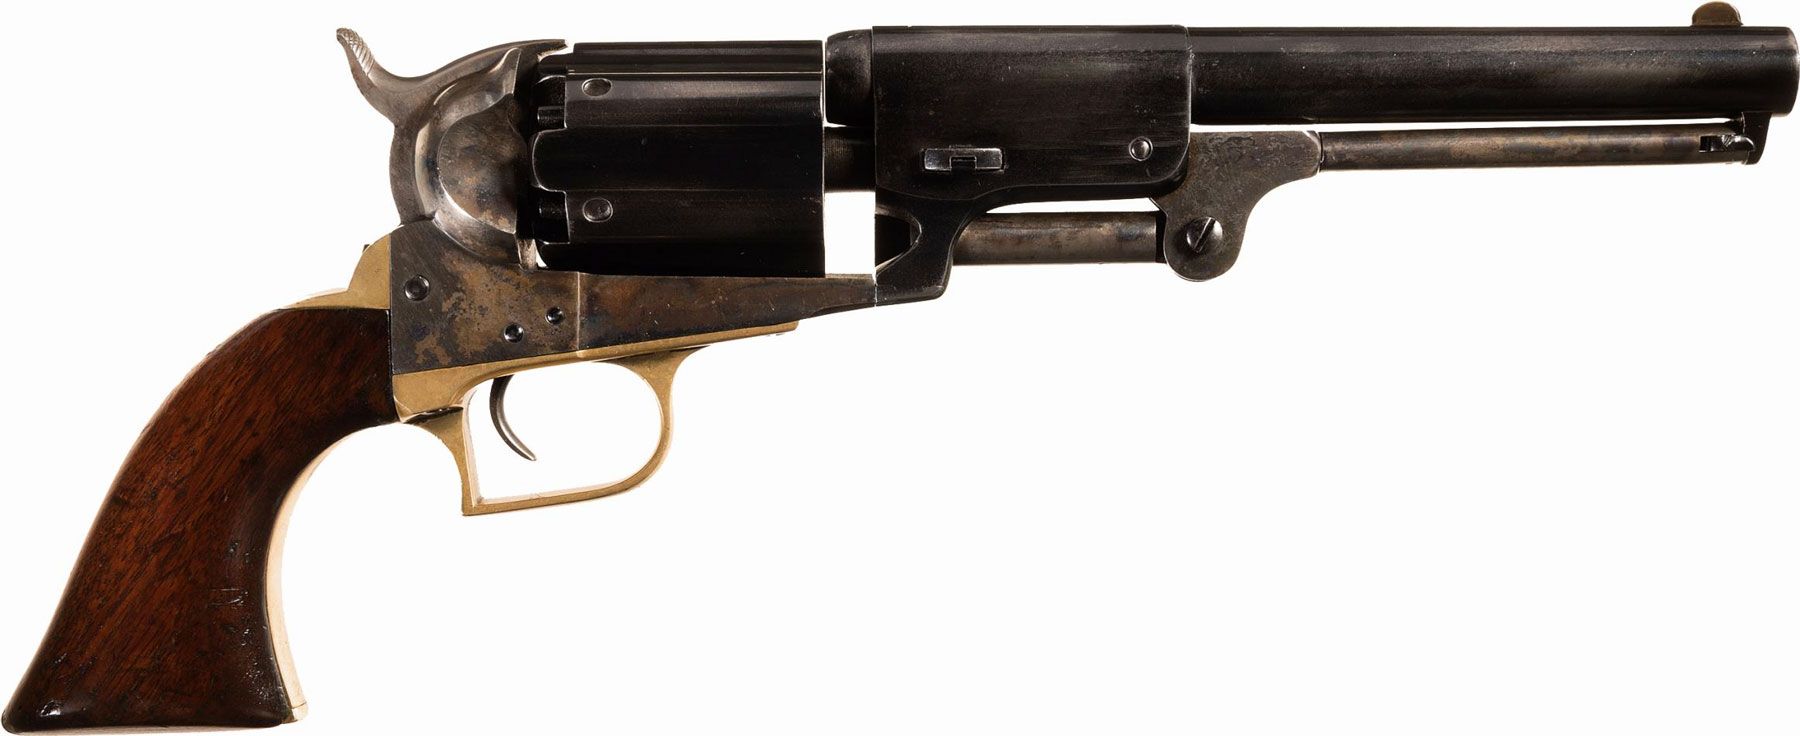 Largest Gun Auction Ever Sees Record Results